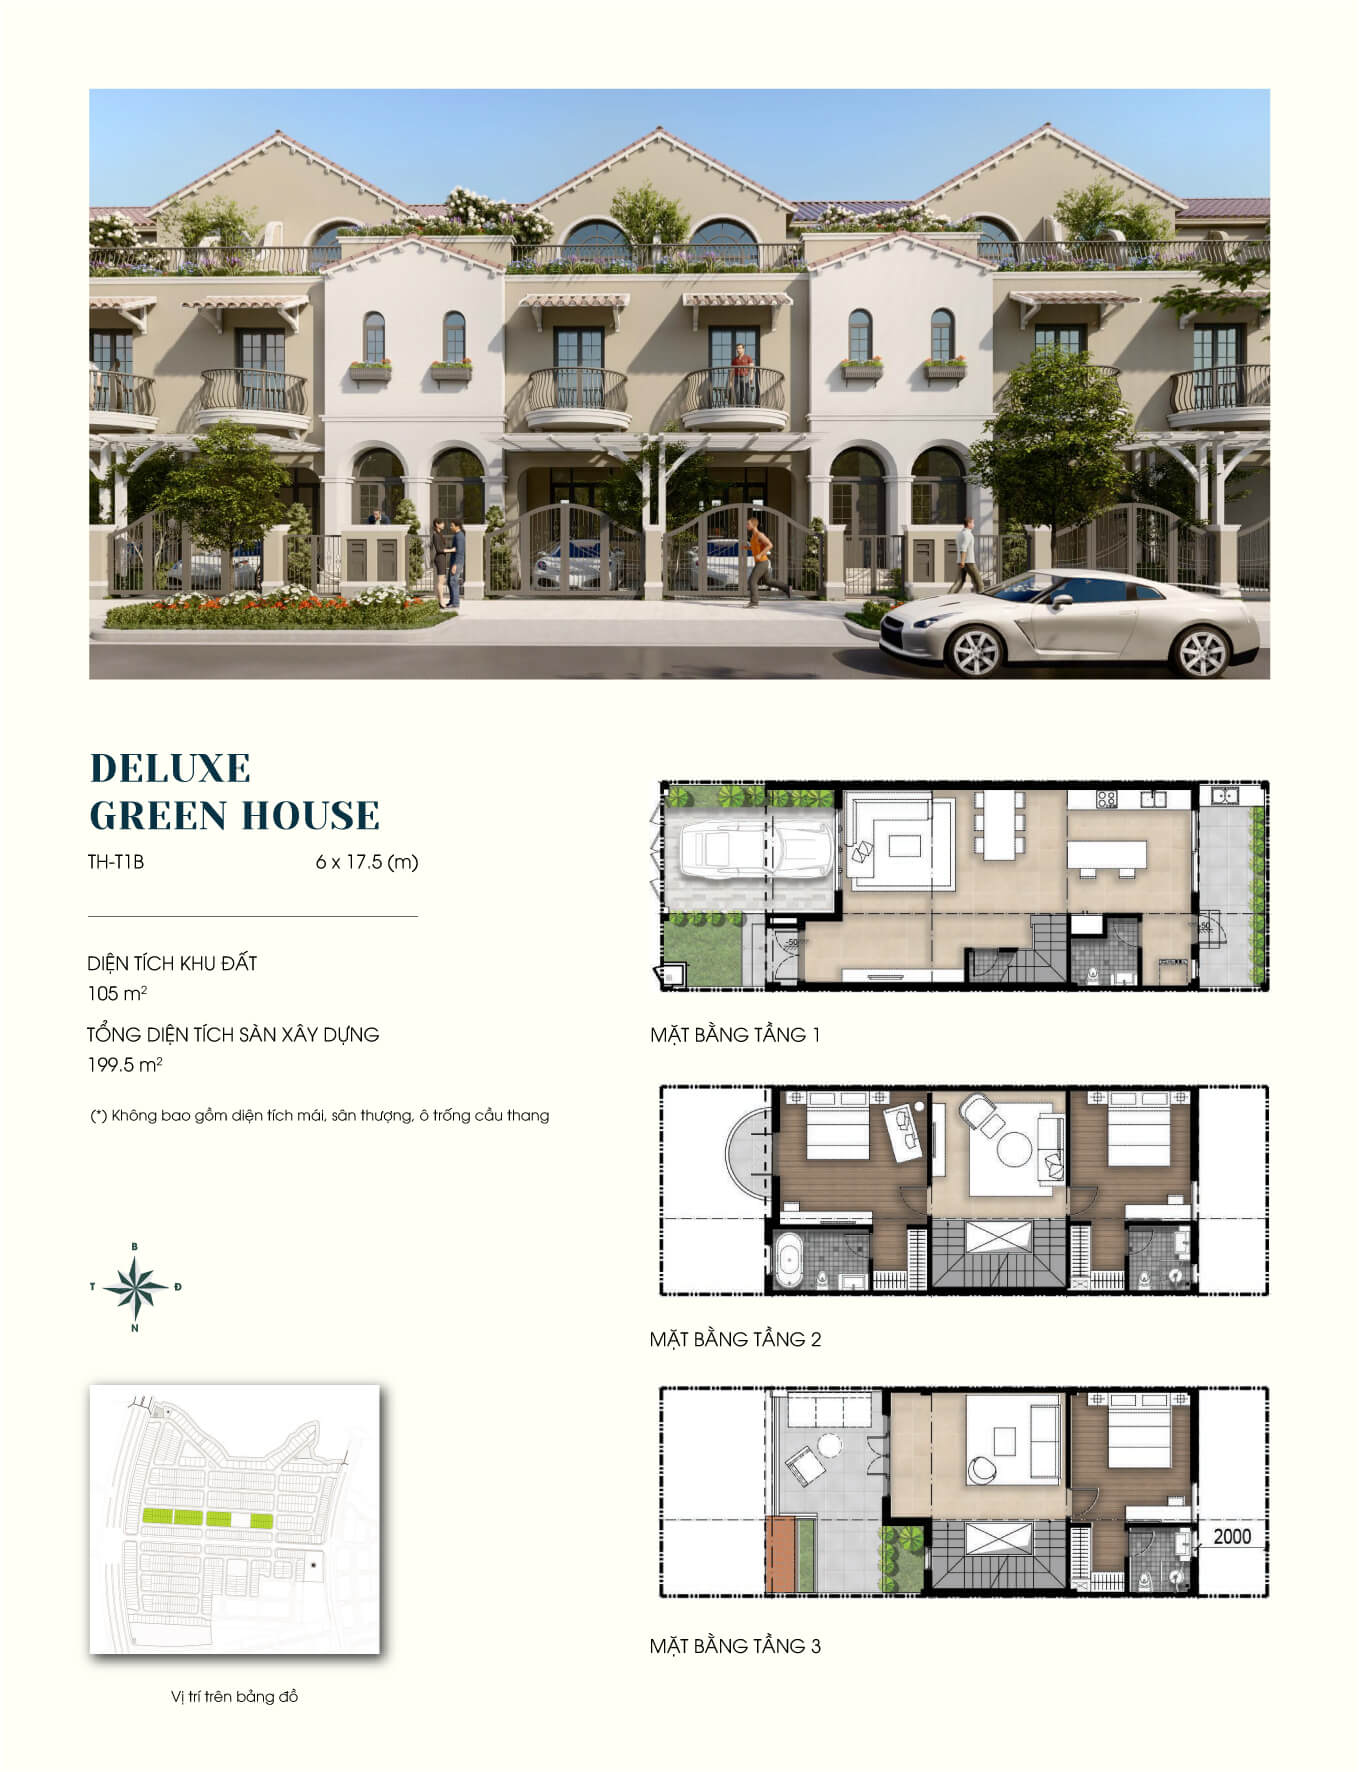 DELUXE GREEN HOUSE Style 2